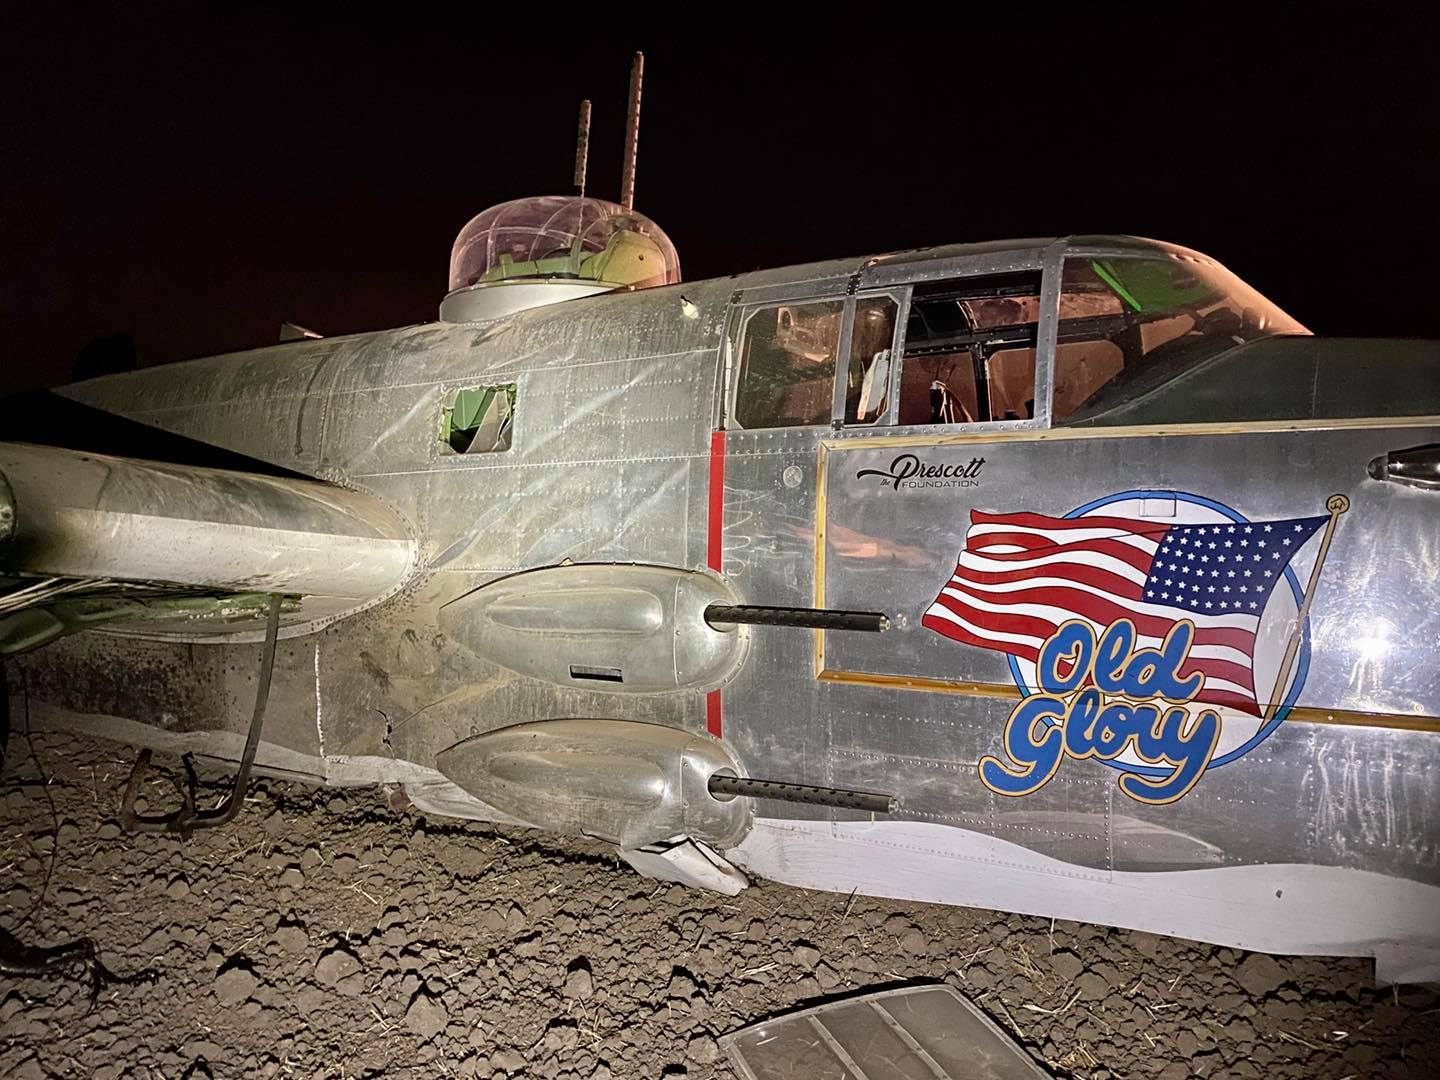 The B-25 flying as Old Glory crashed in California.